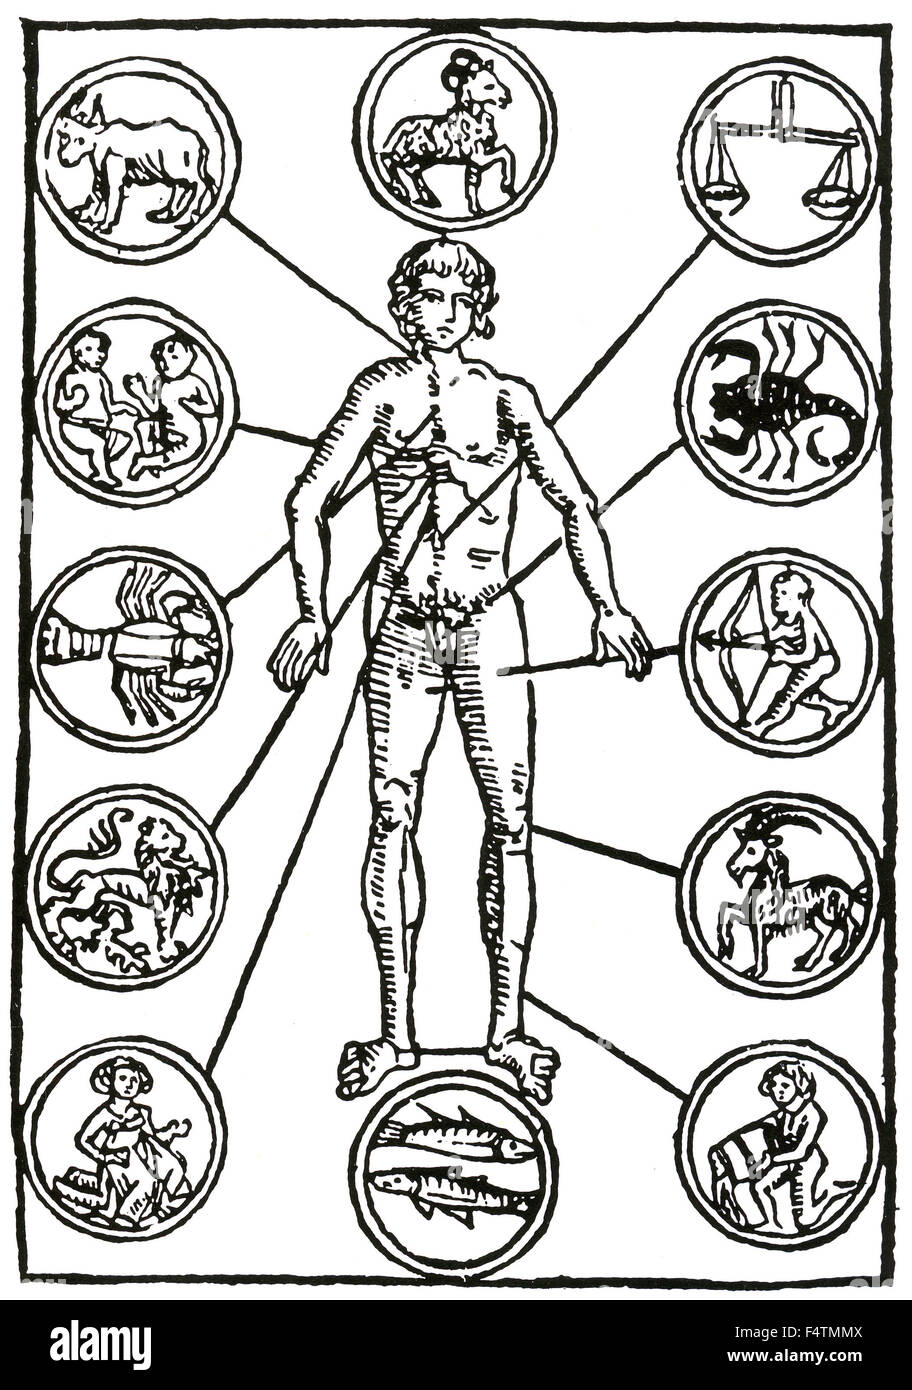 ZODIAC MAN Homo signorum  A simple 15th century German woodcut showing the parts of the zodiac associated with various parts of the human body Stock Photo